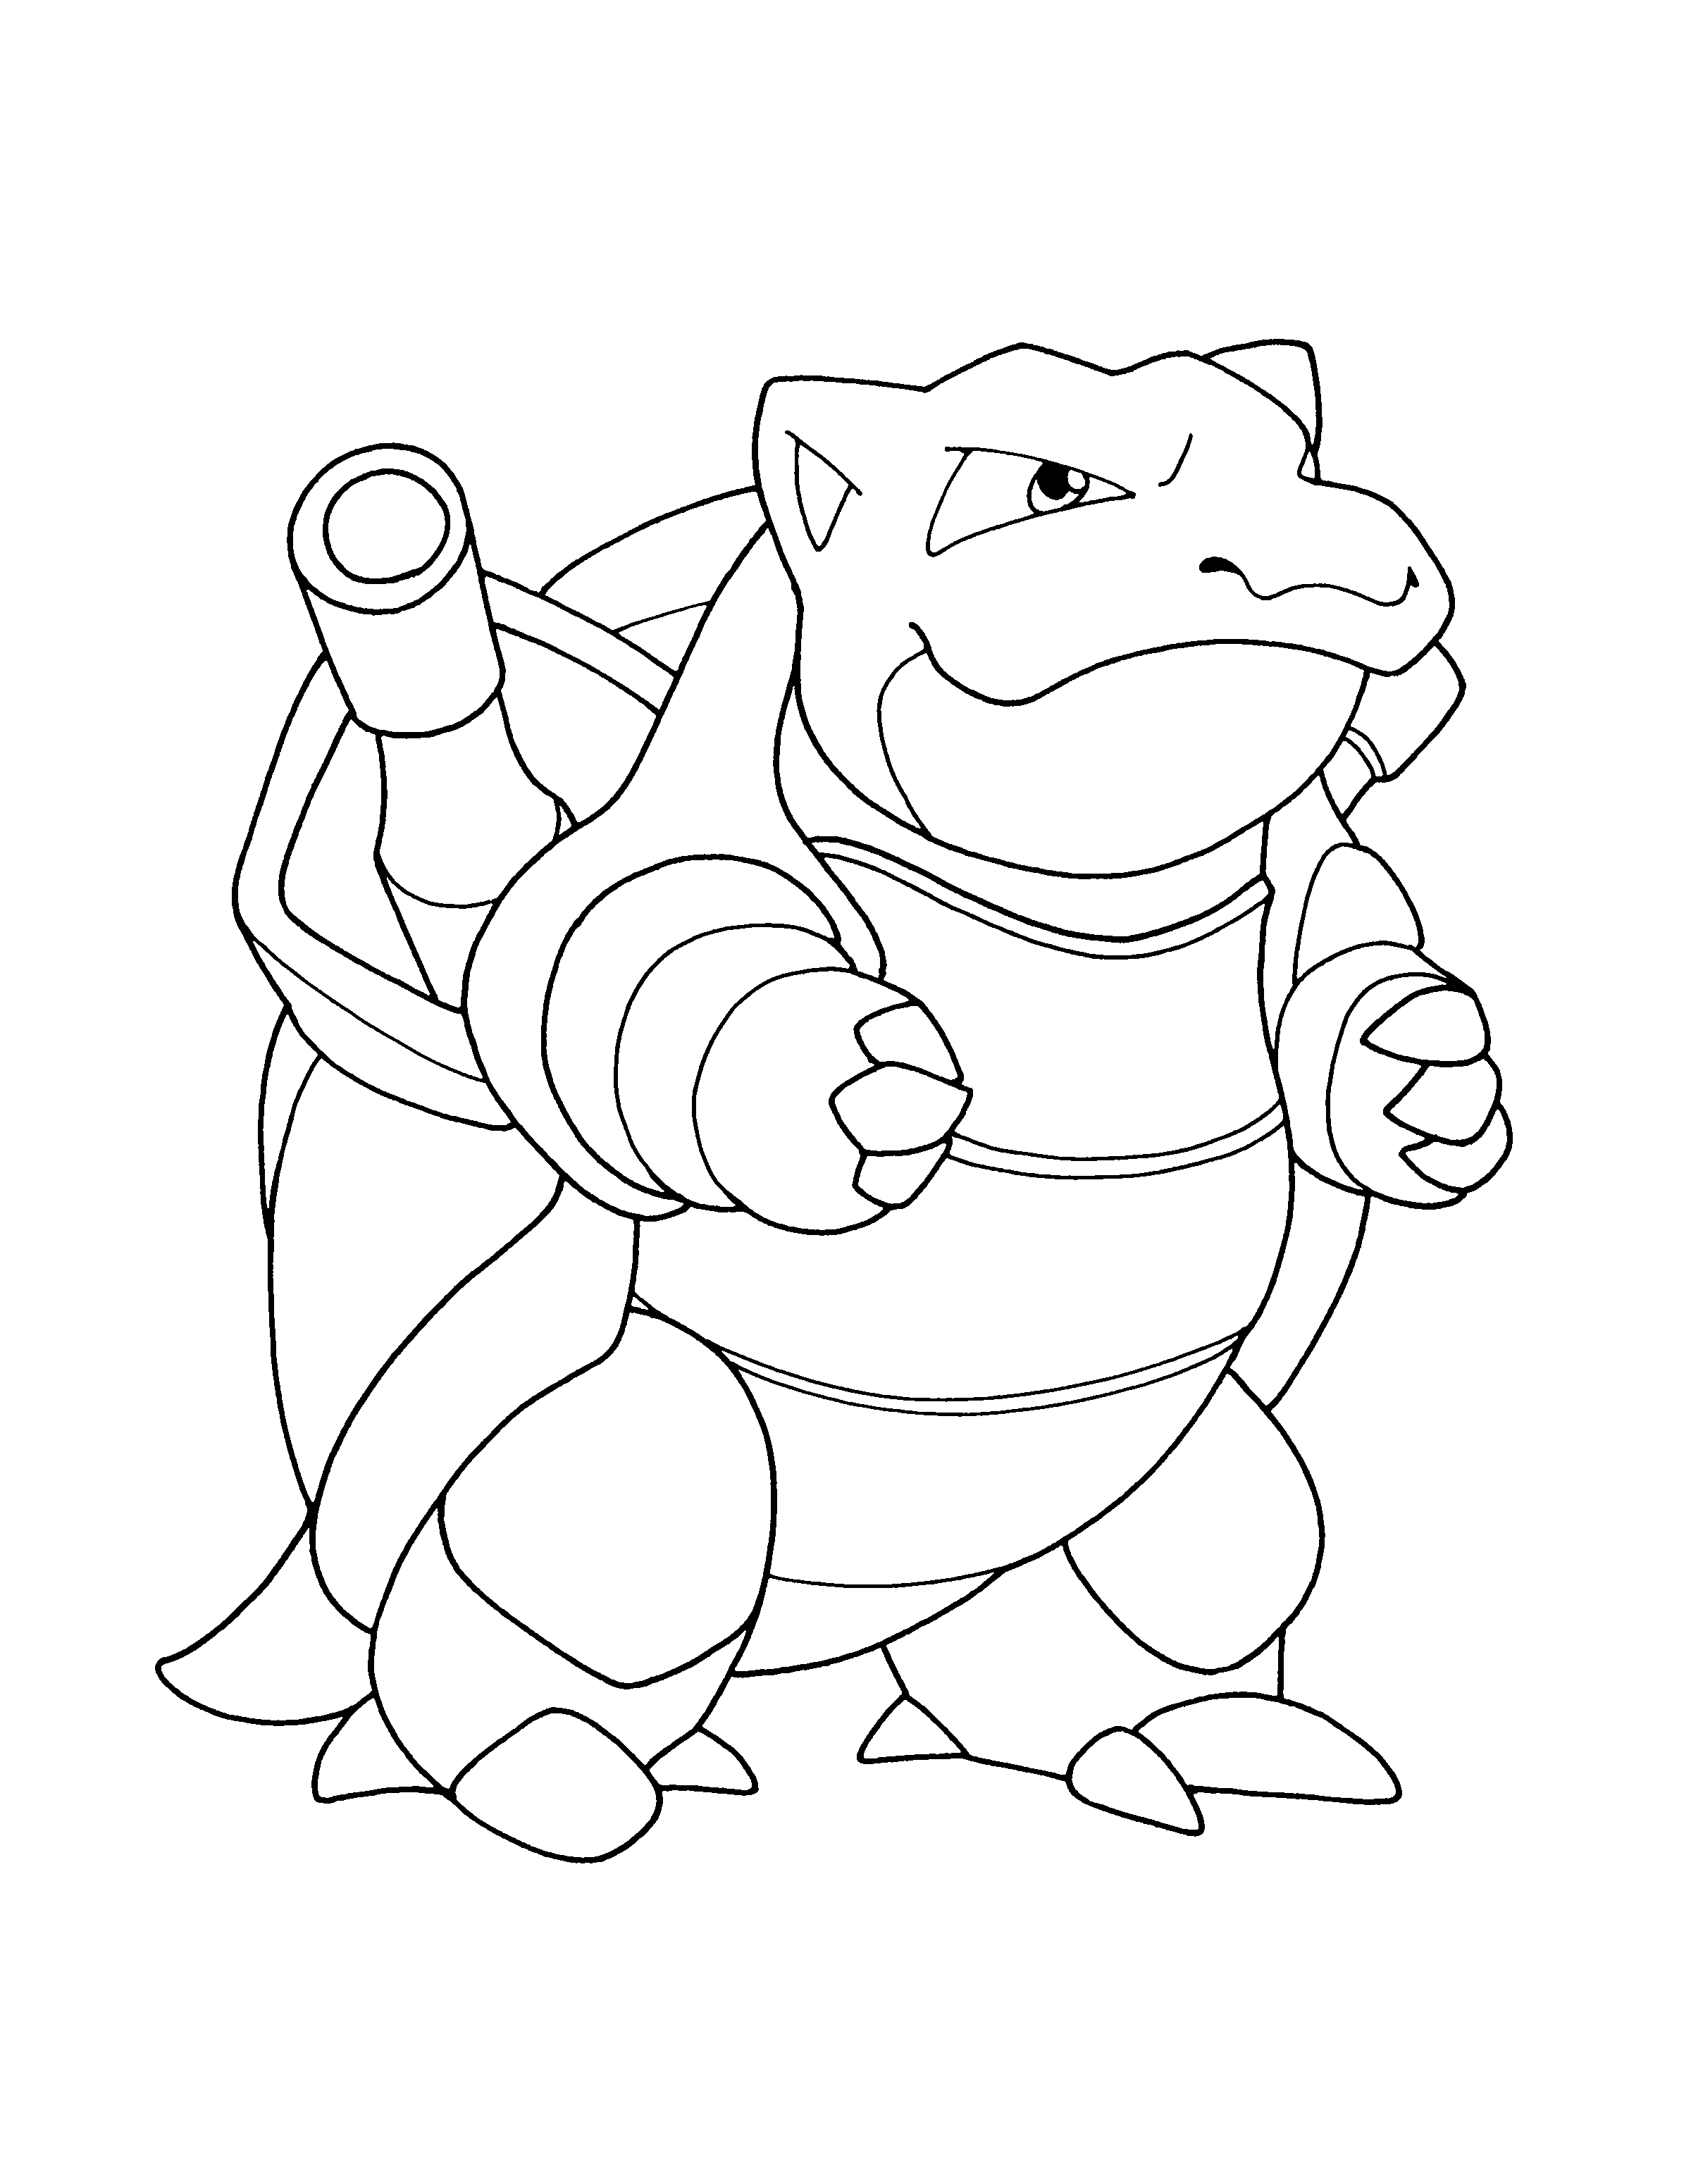 blastoise coloring page 2